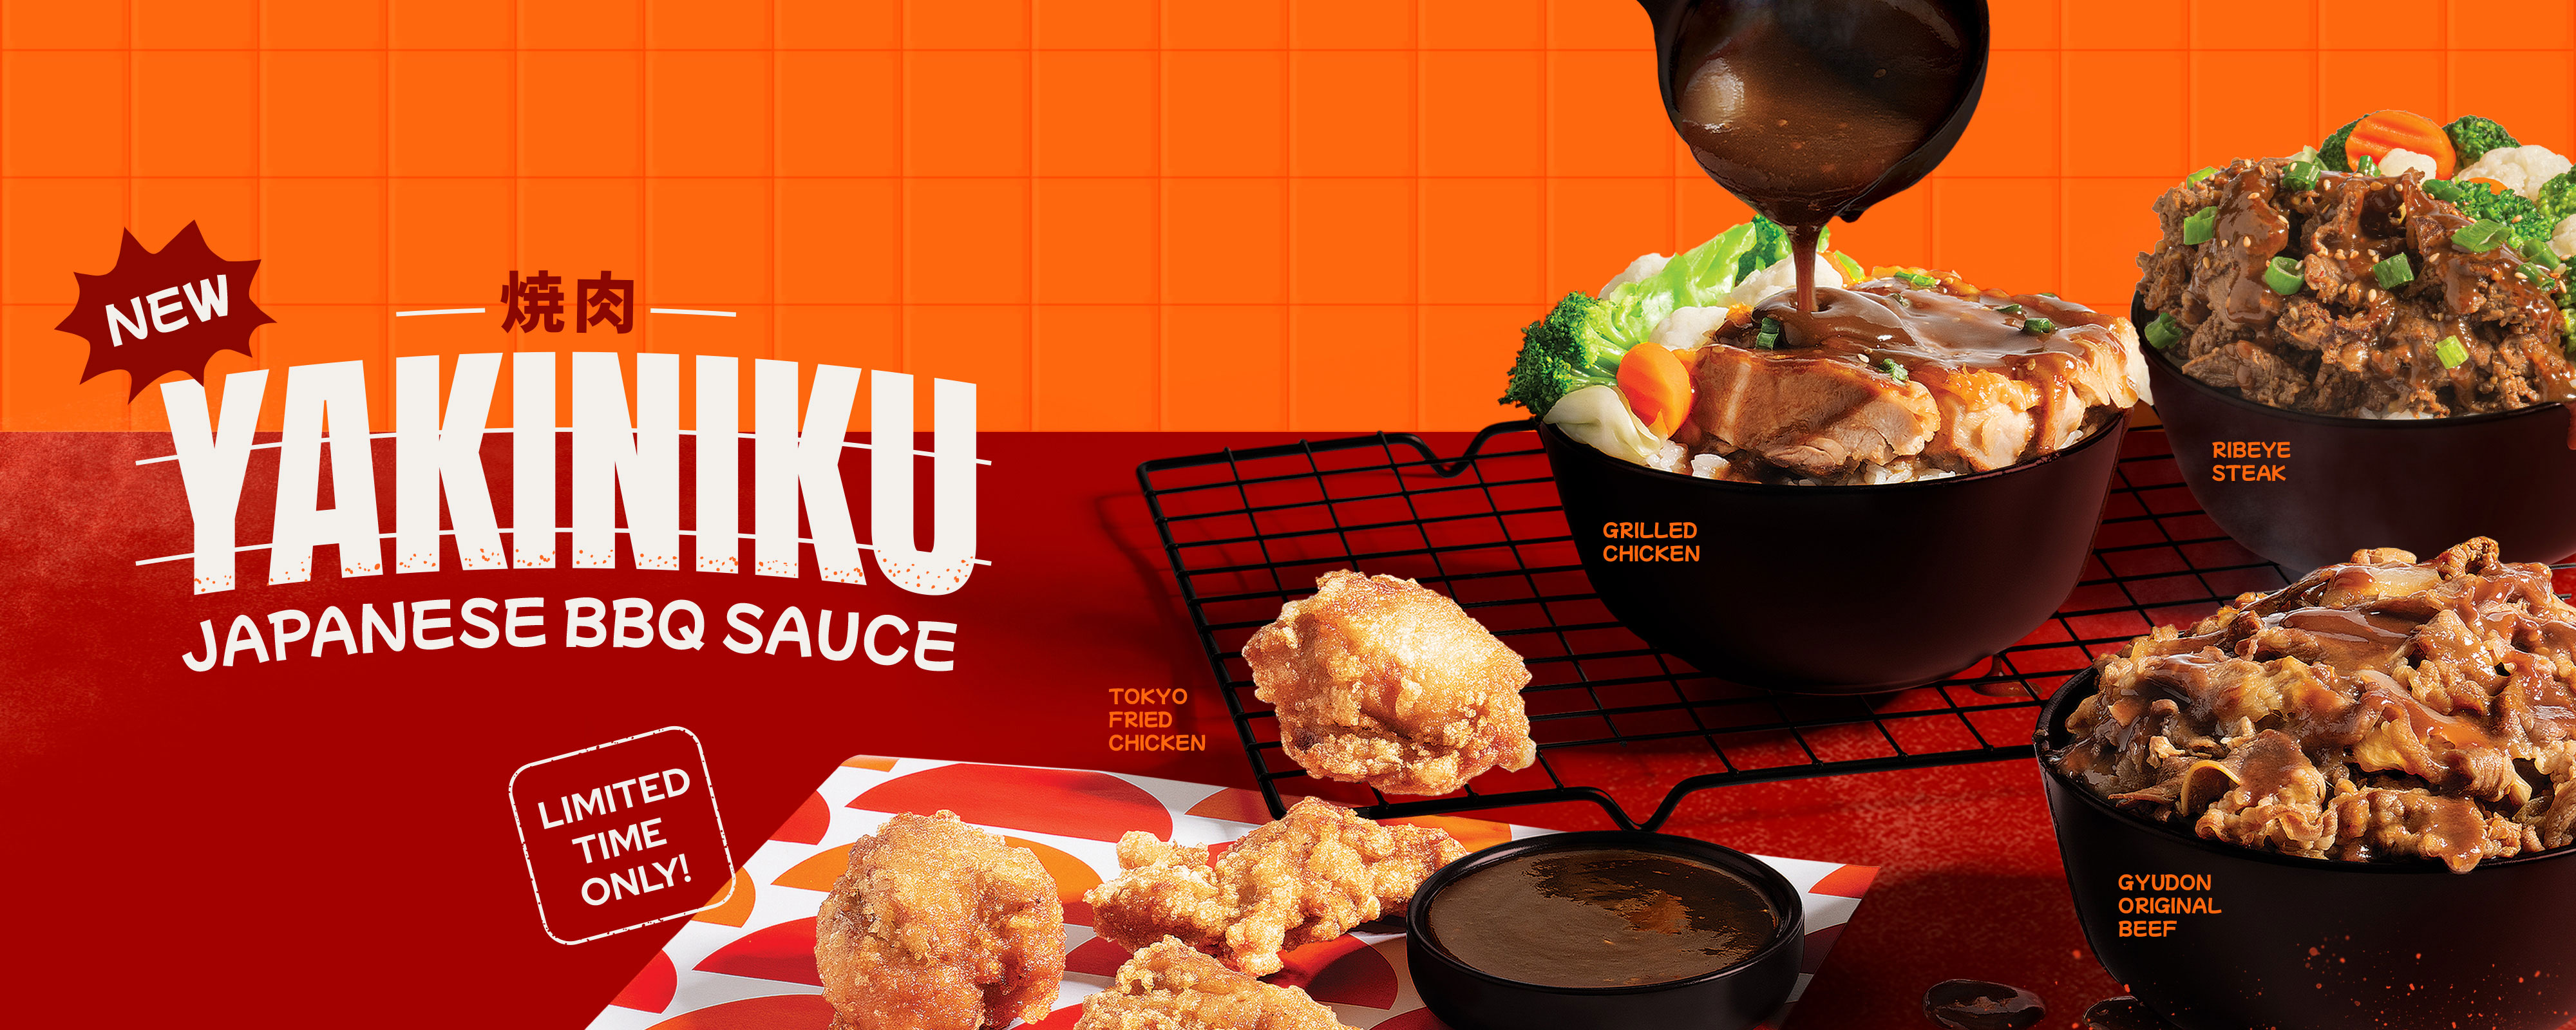 NEW Yakiniku Japanese BBQ Sauce. Limited Time Only! Tokyo Fried Chicken, Grilled Chicken, Ribeye Steak, and Gyudon Original Beef.